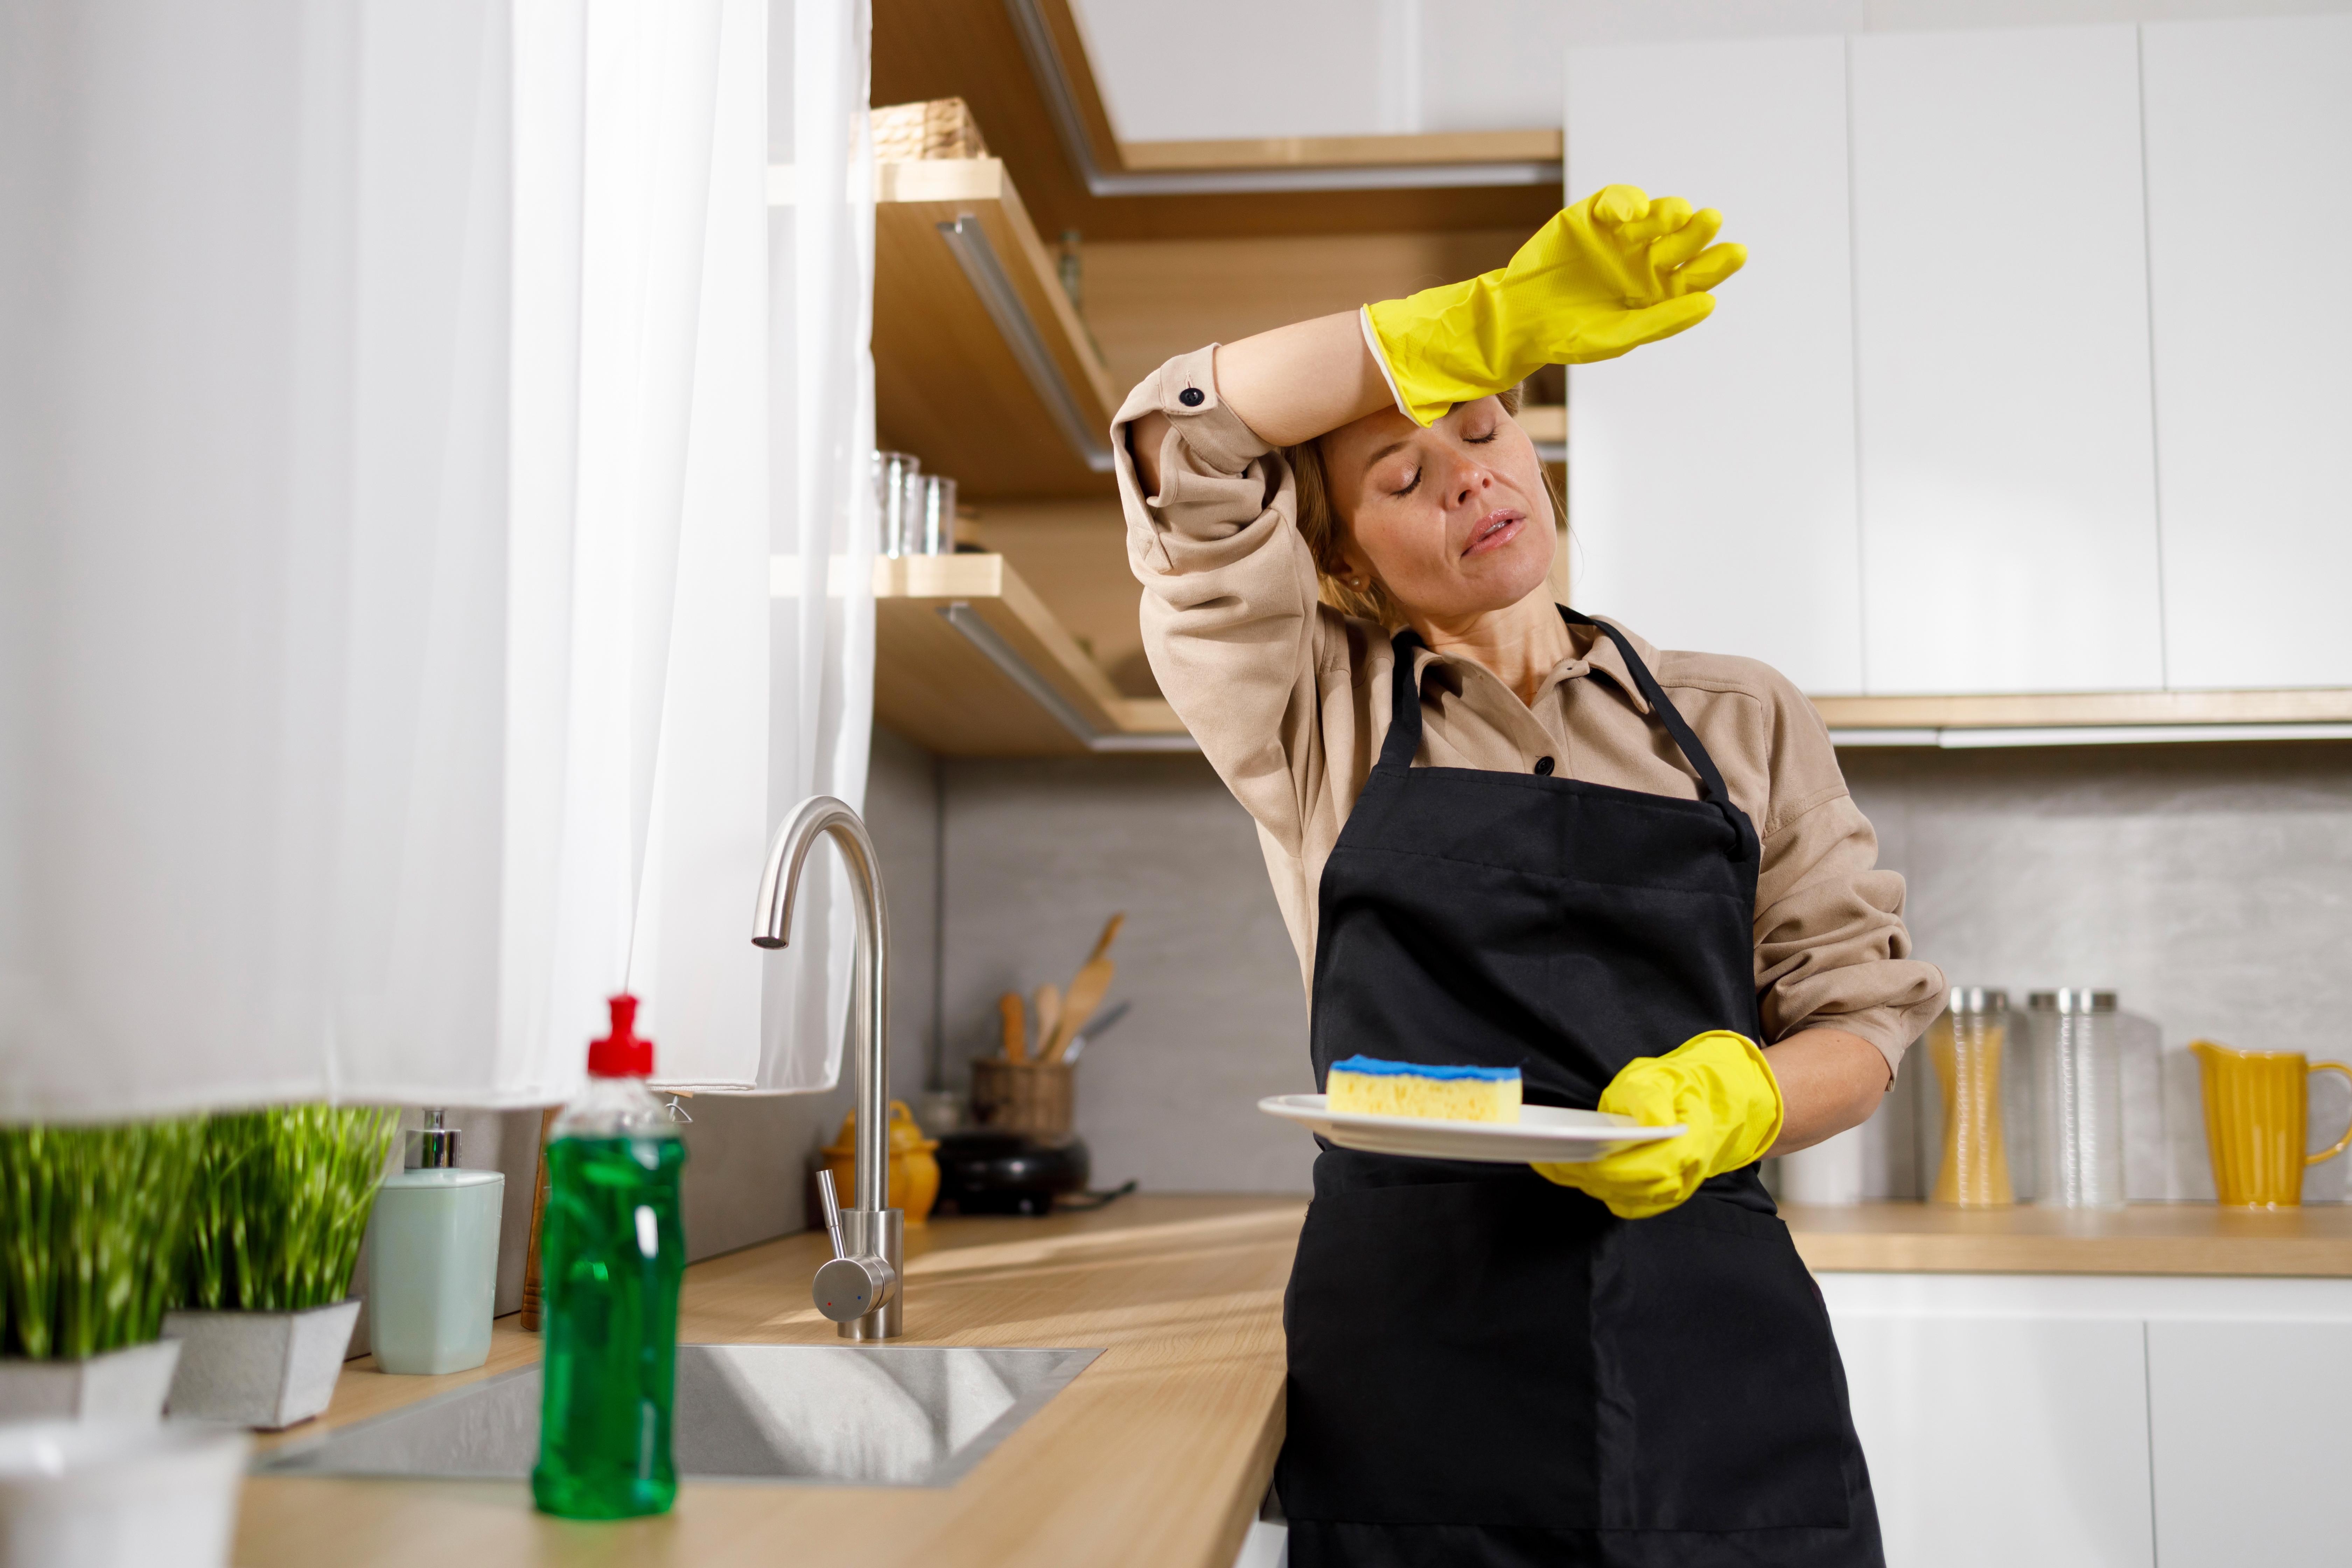 A tired woman washing dishes in the kitchen | Source: Shutterstock